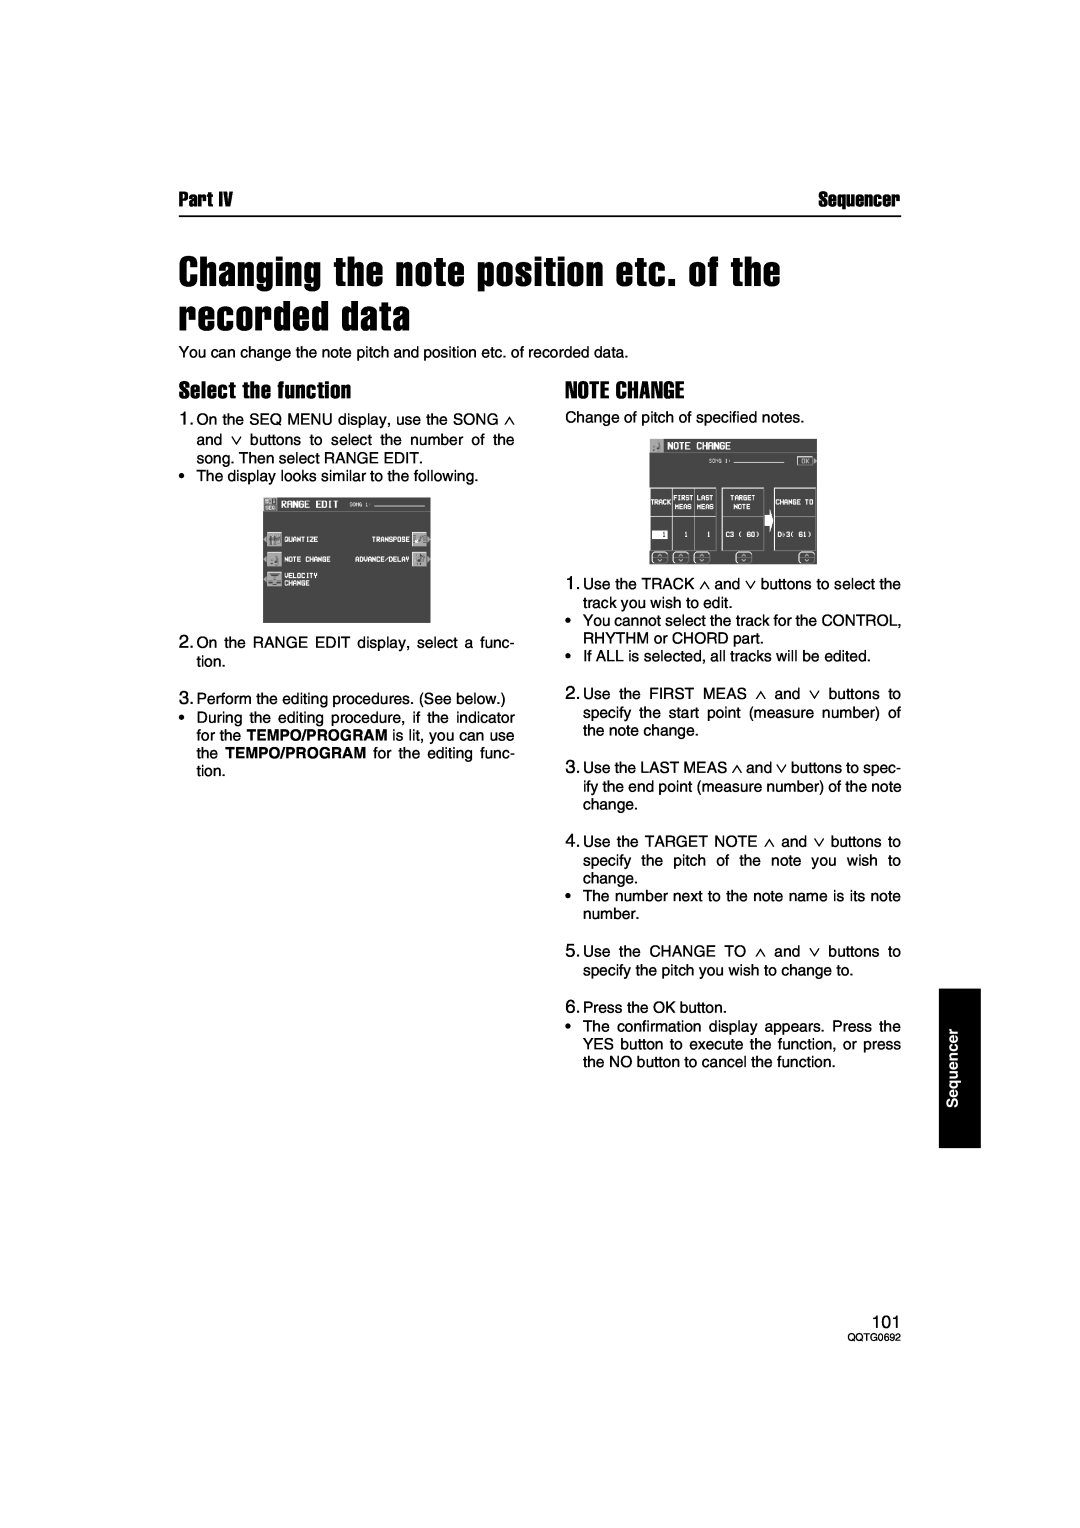 Panasonic SX-KN2400 manual Changing the note position etc. of the recorded data, Note Change, Select the function, Part 